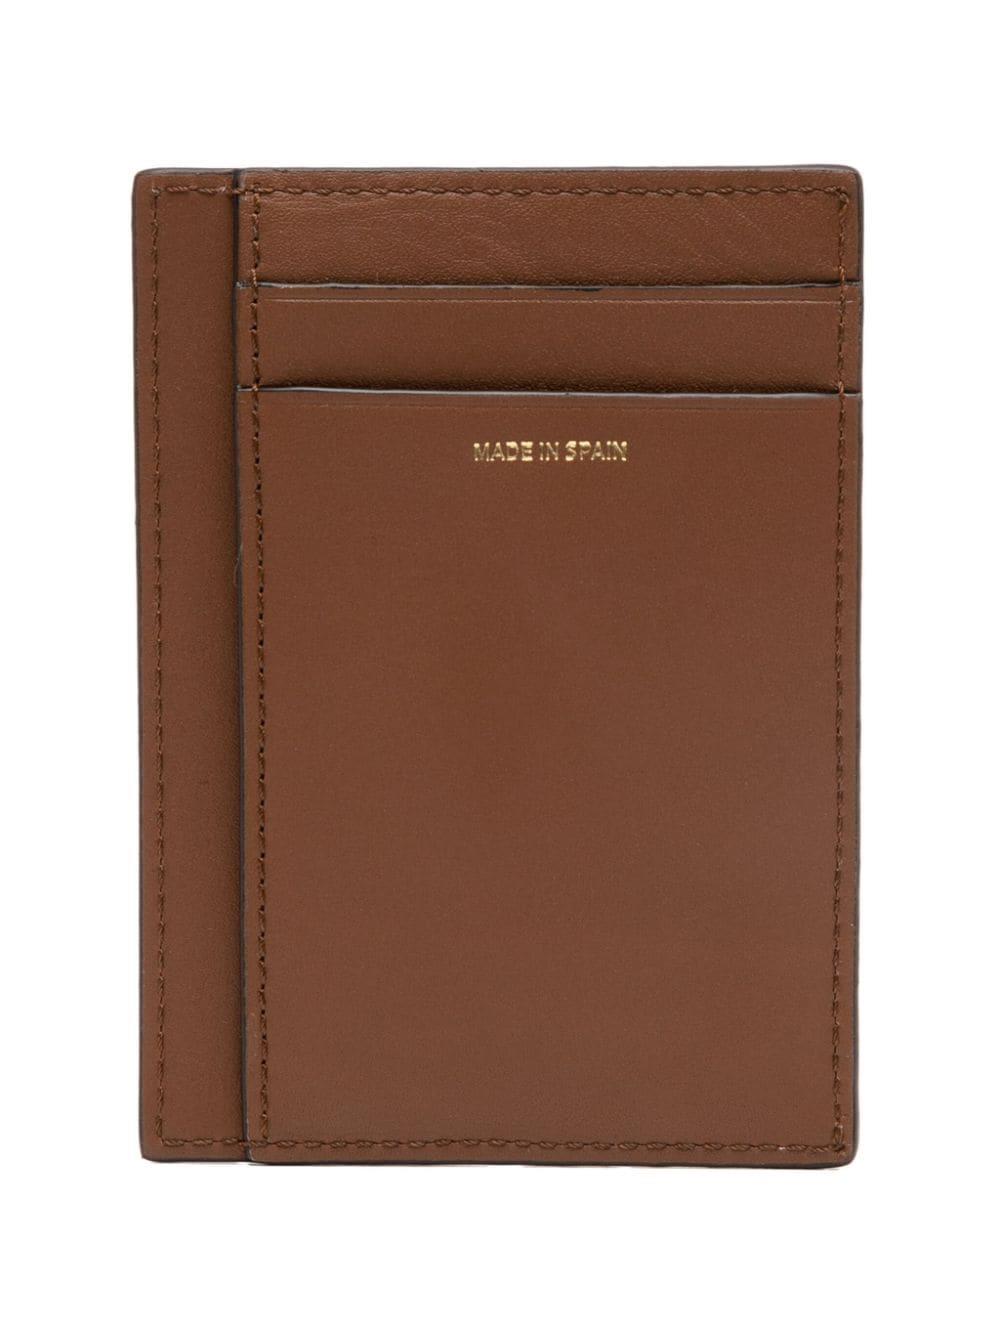 Paul Smith woven leather cardholder - Brown